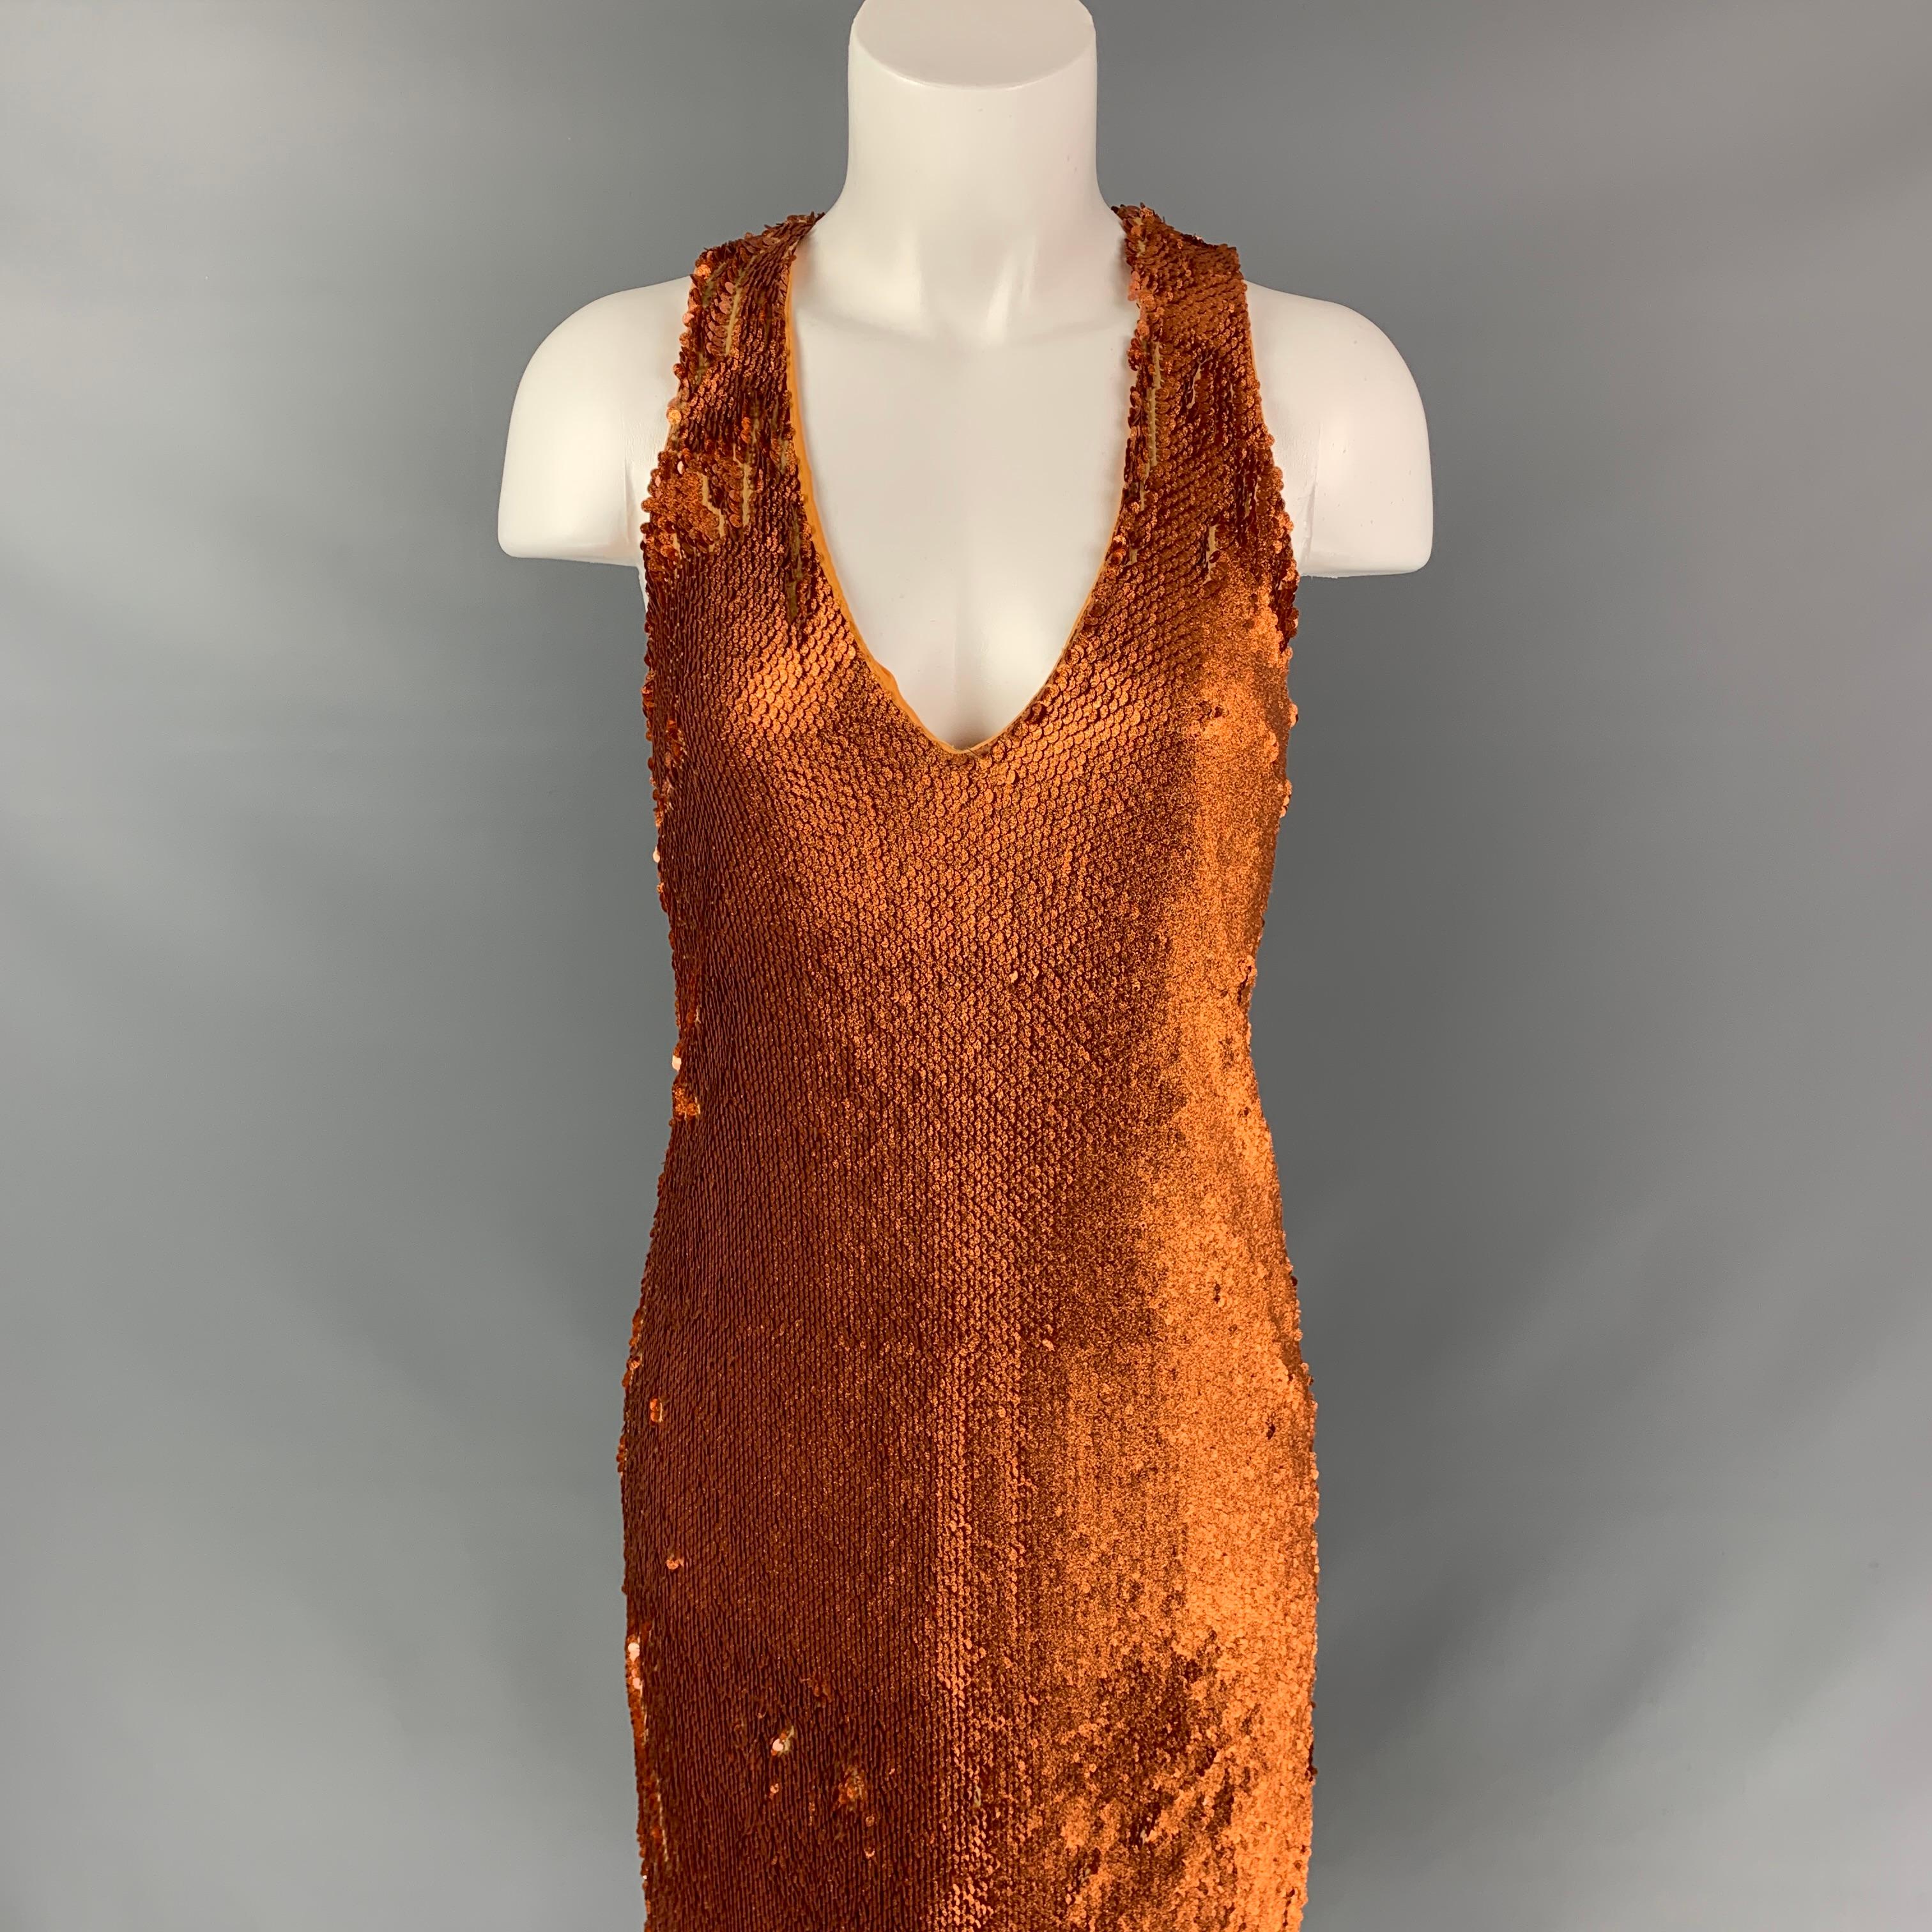 PRABAL GURUNG dress comes in a copper sequined polyester featuring a slip on style, side slit, sleeveless, and a v-neck. 

Very Good Pre-Owned Condition.
Marked: 0

Measurements:

Bust: 30 in.
Hip: 34 in.
Length: 44 in. 